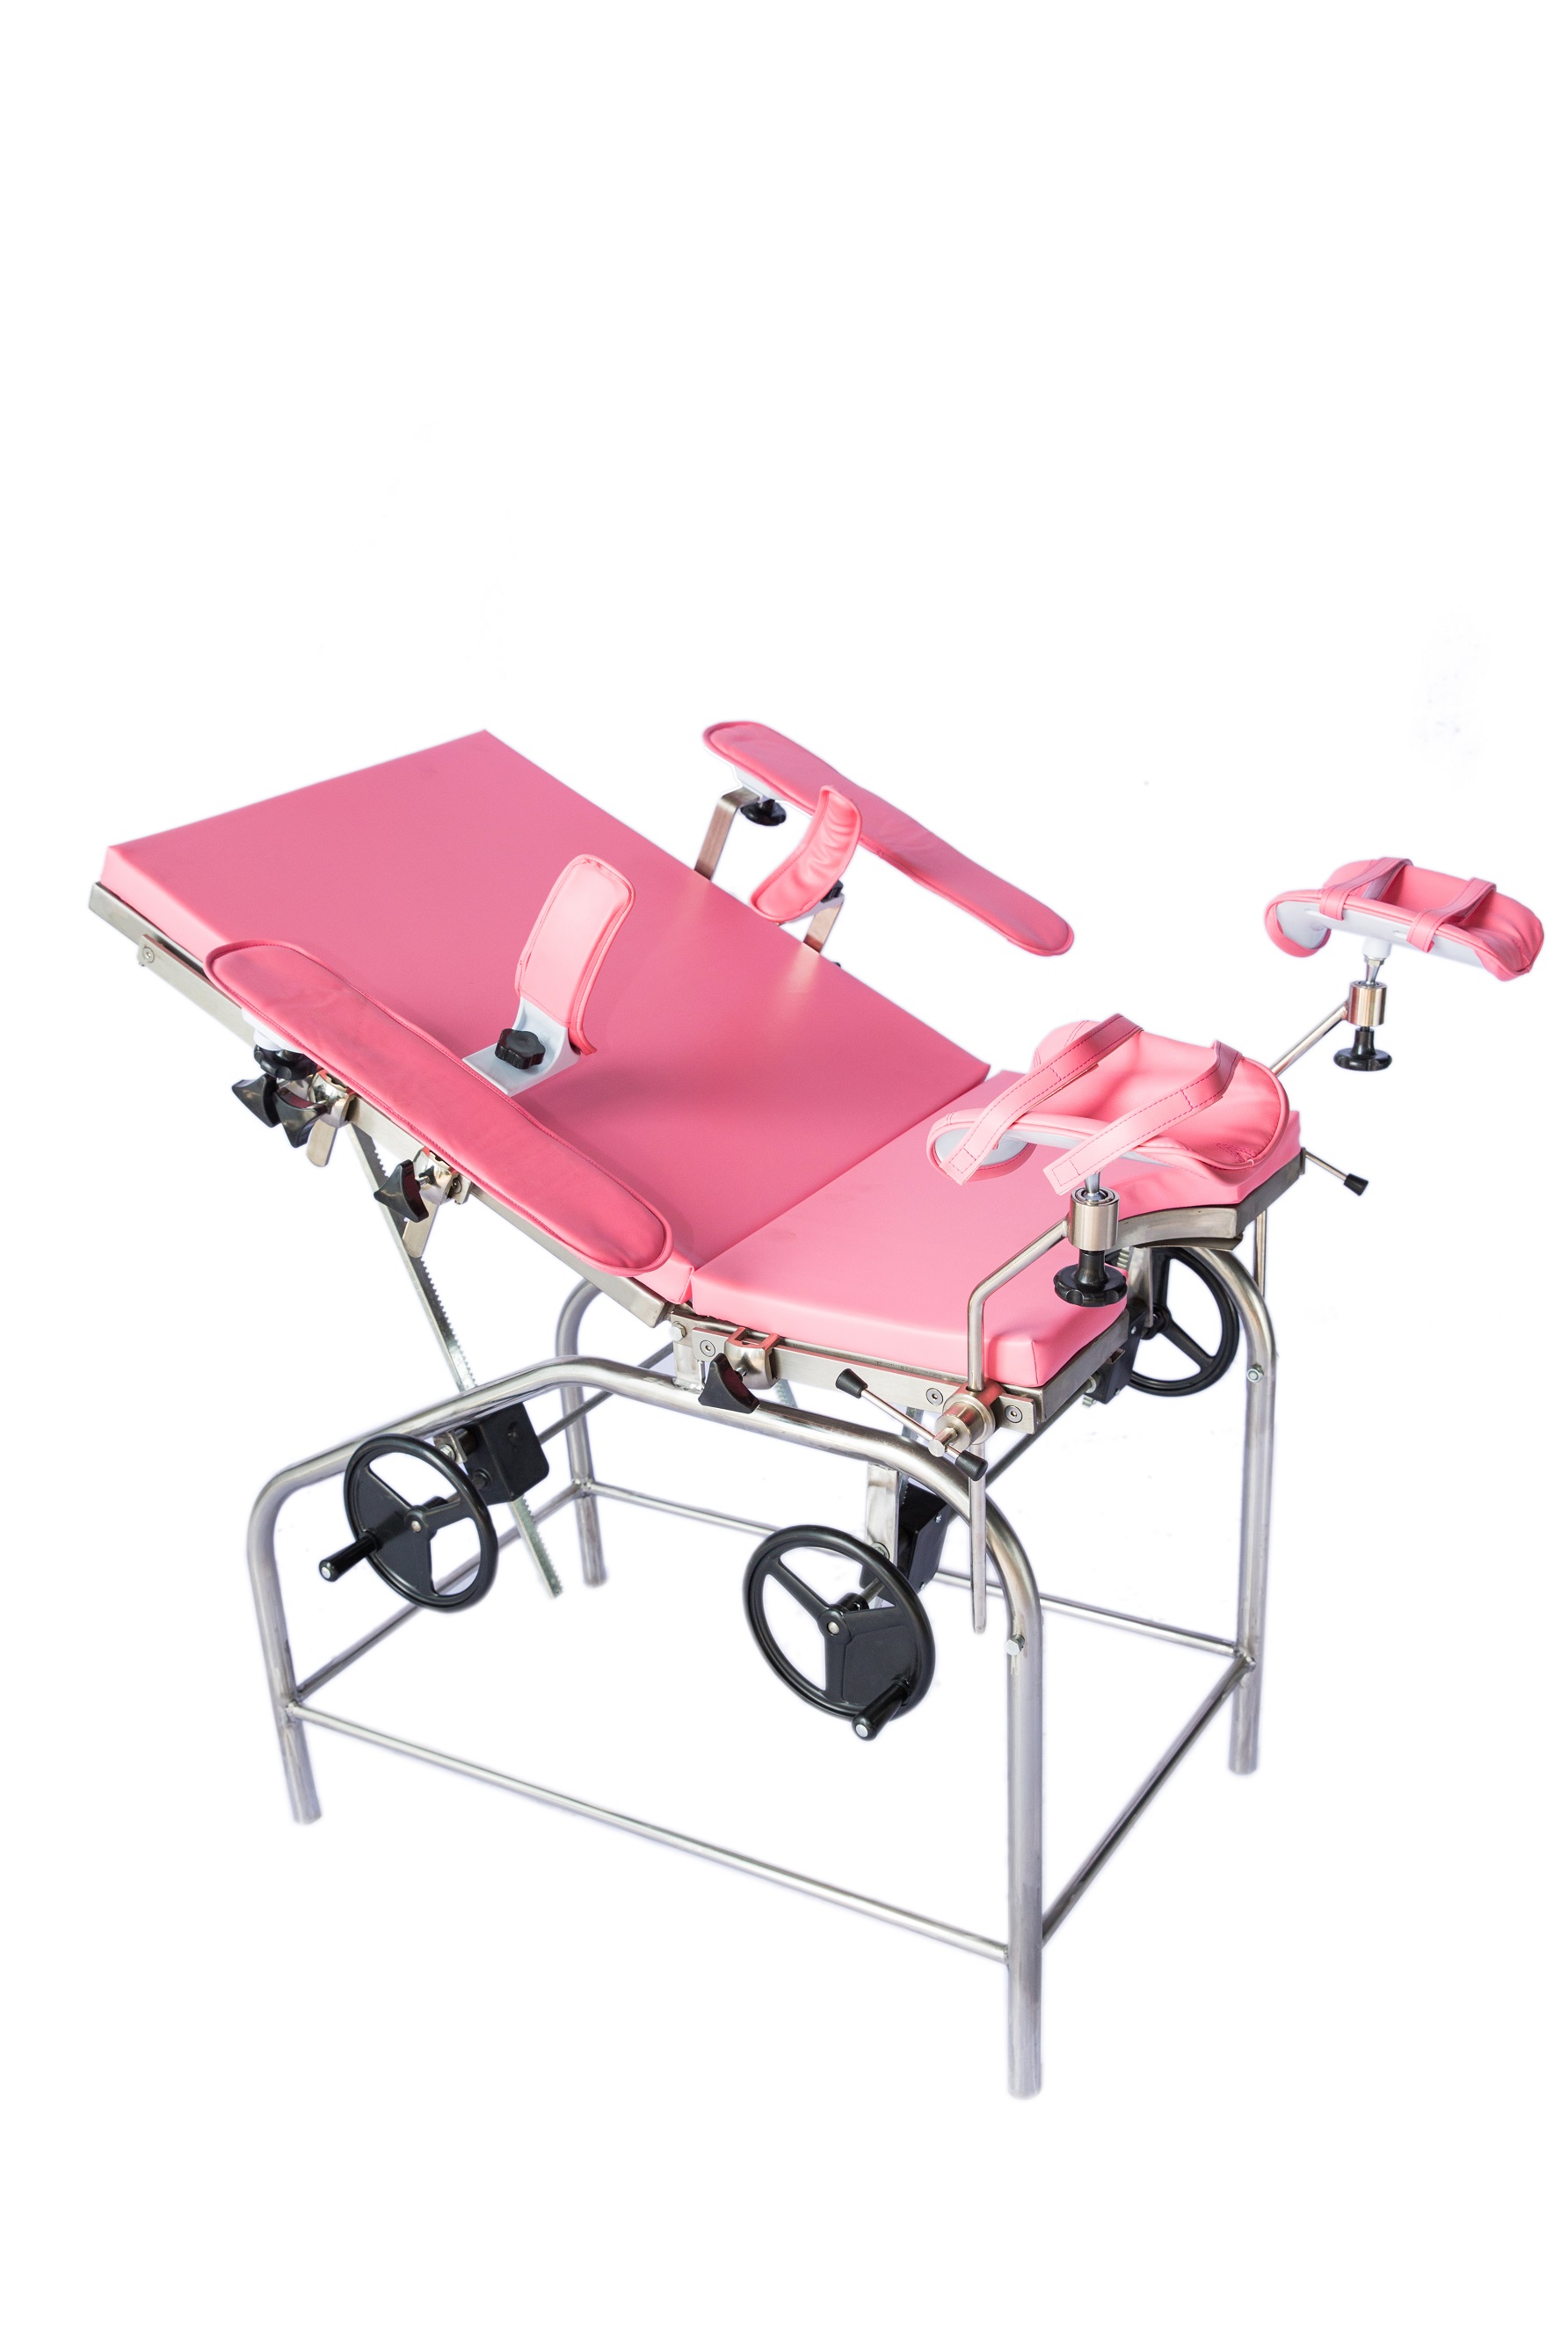 Delivery Table Obstetric Cheap Medical Obstetric Examination Manual obstetric bed Common Manual Delivery Bed